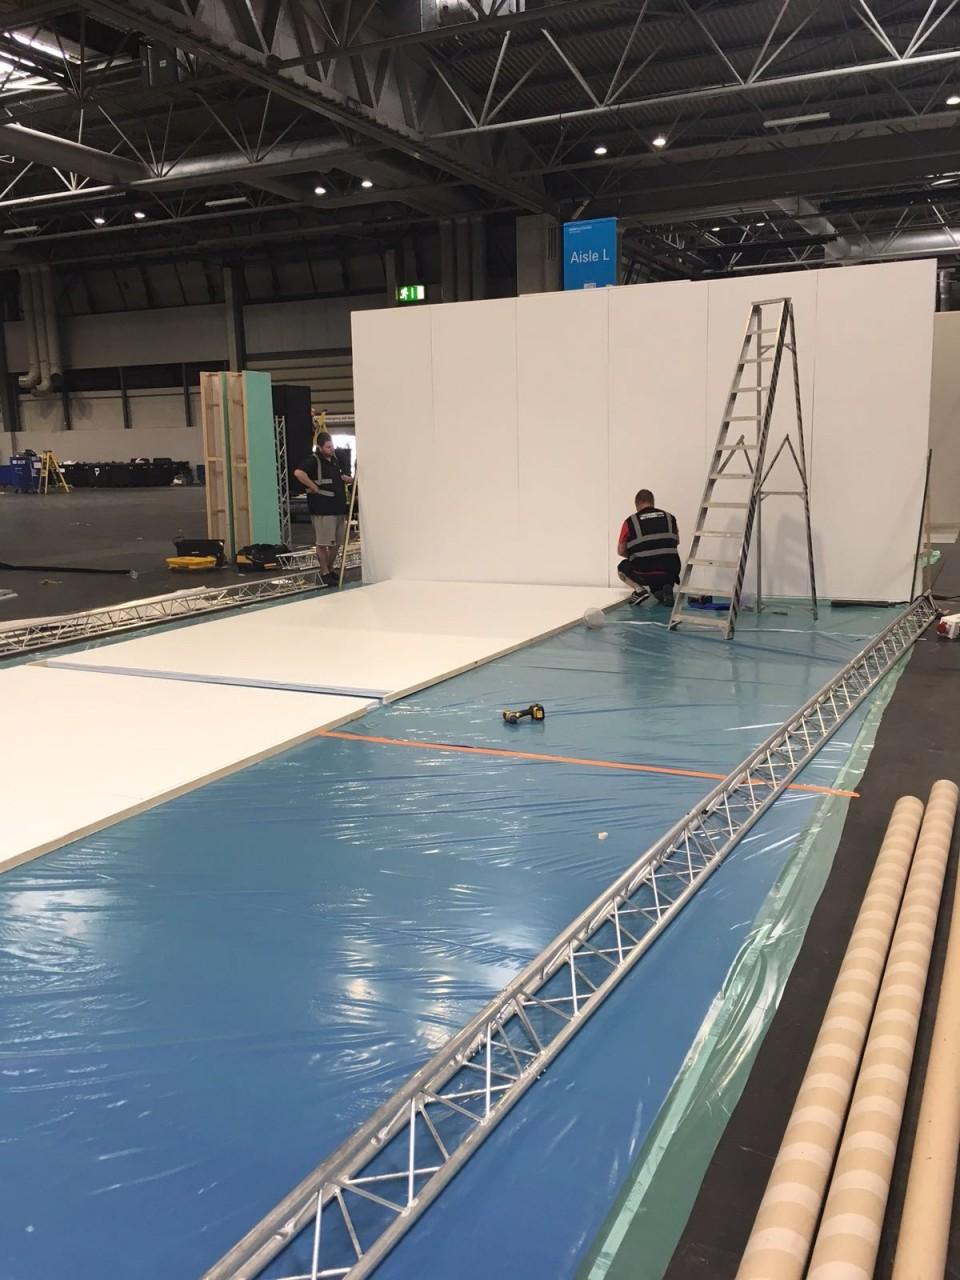 Setting up the stand for Automechanika 2018